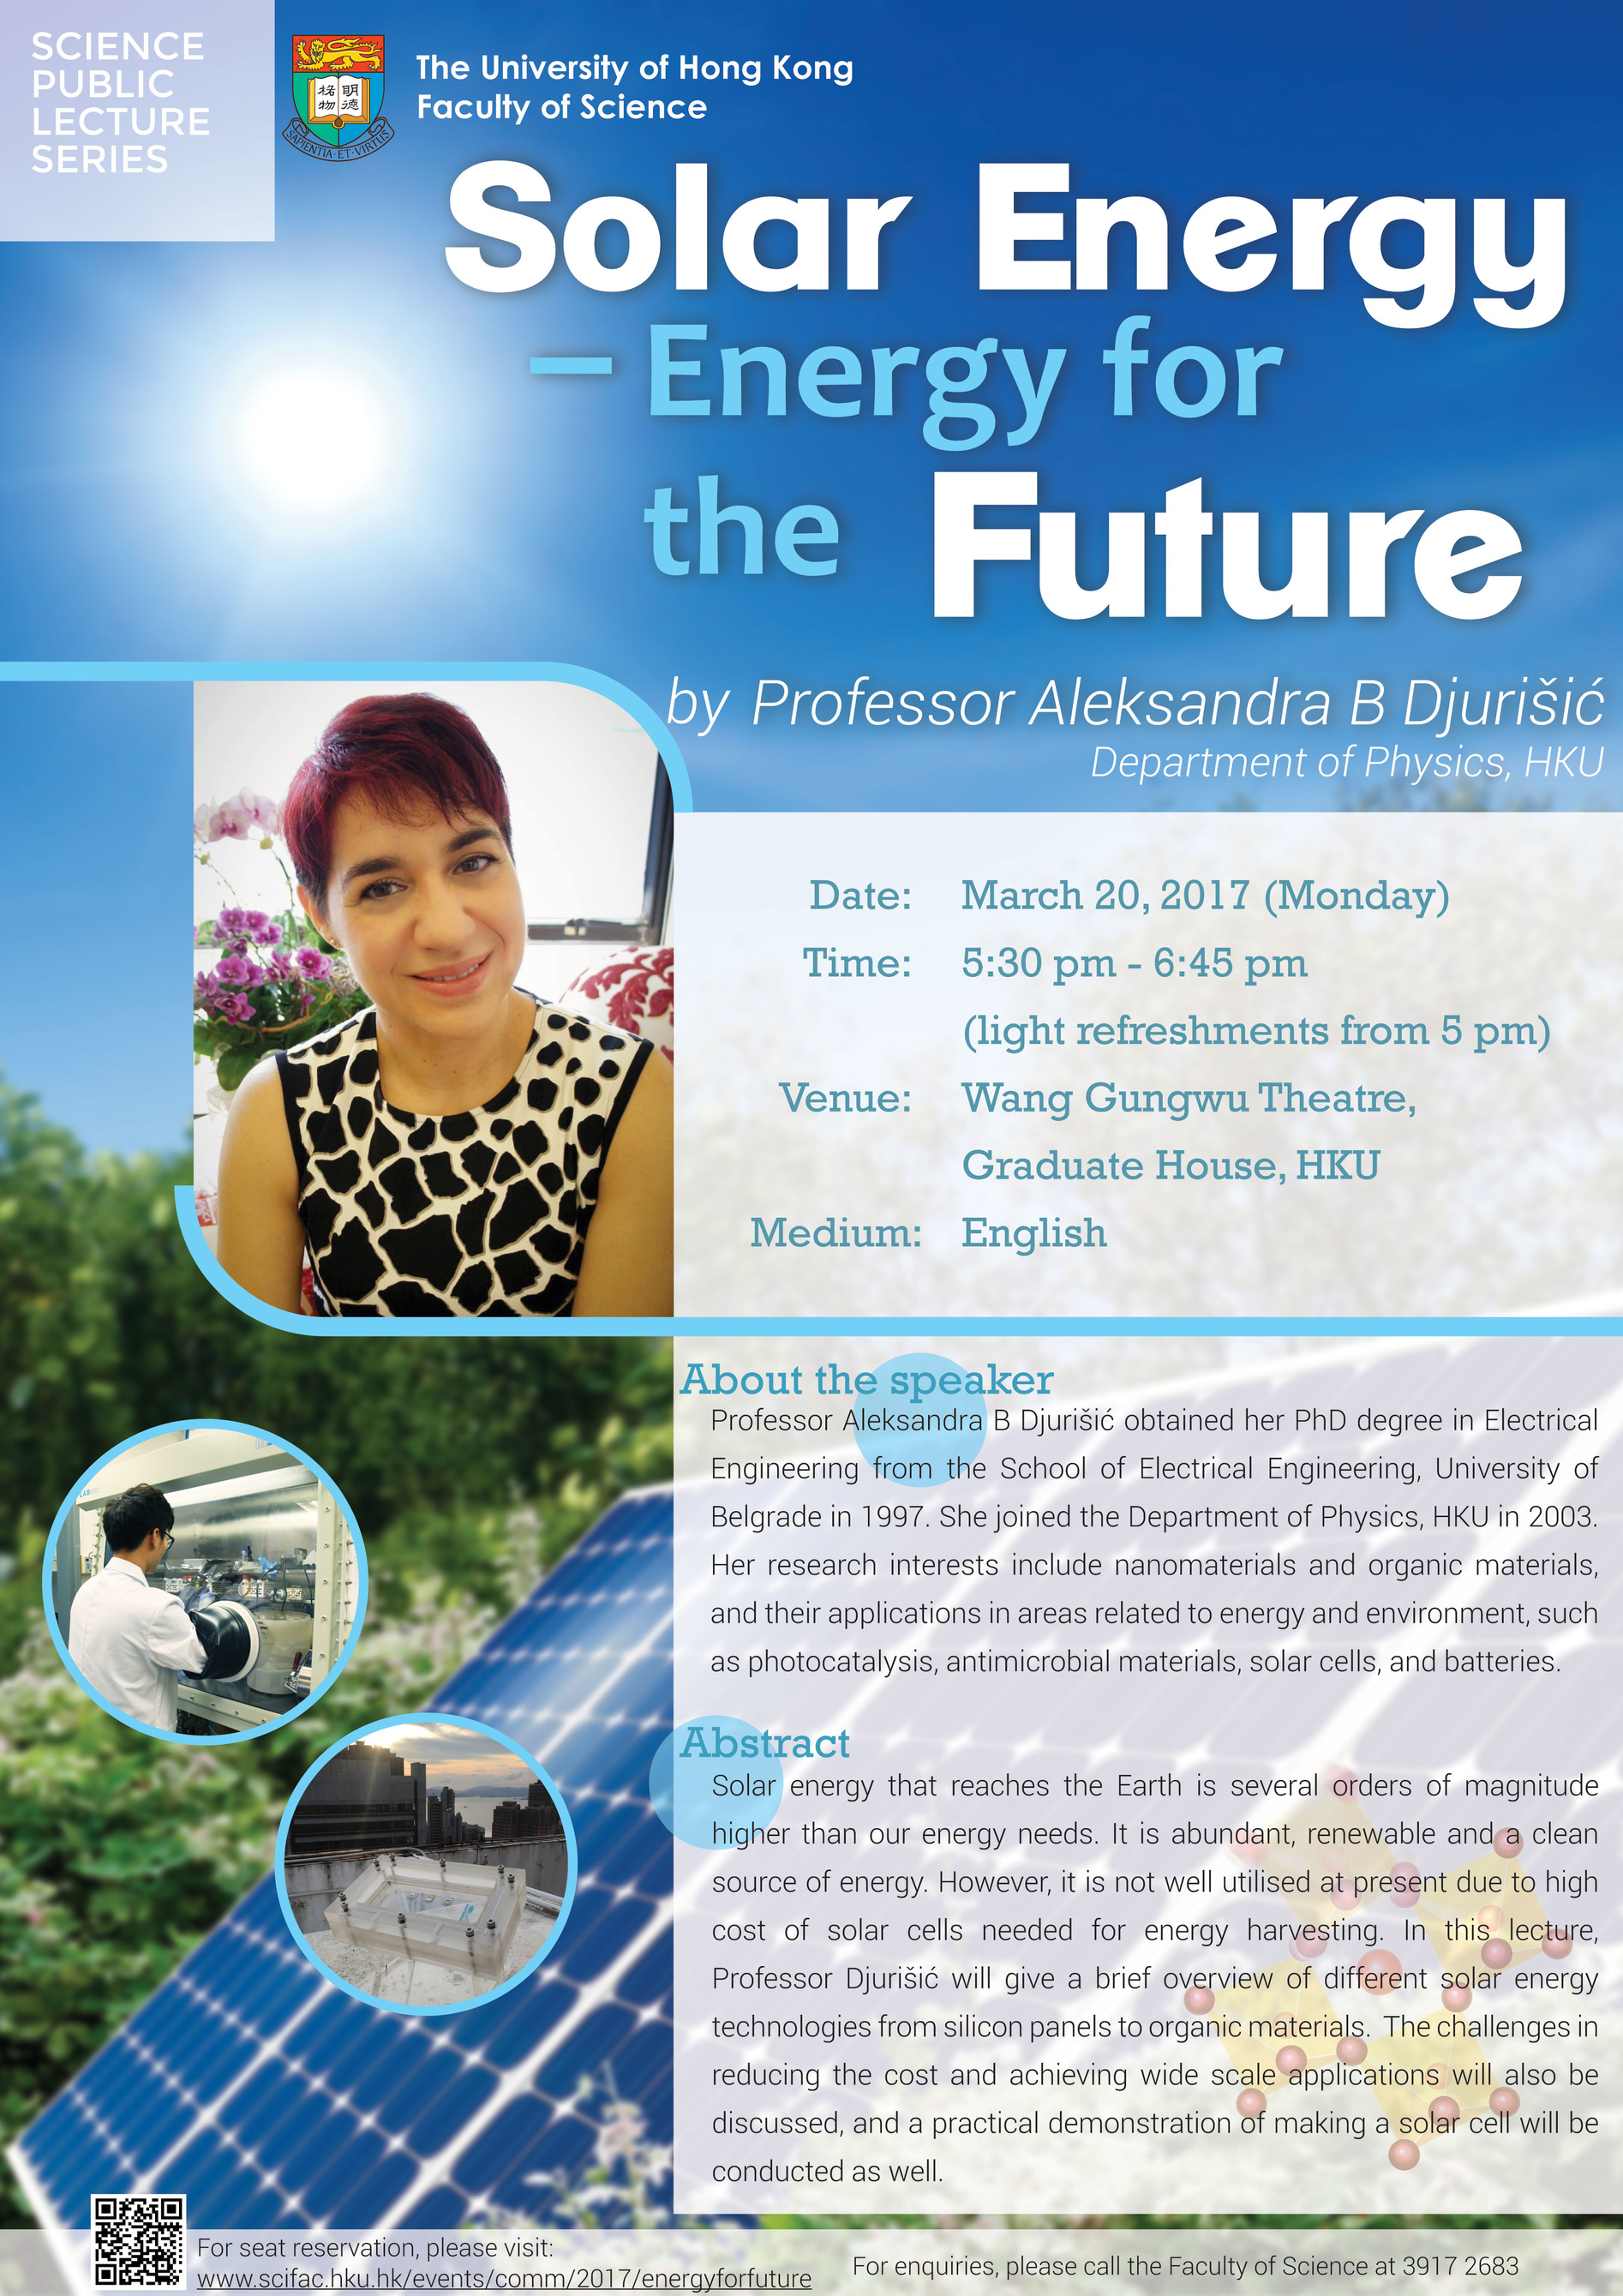 Public Lecture: Solar Energy - Energy for the Future